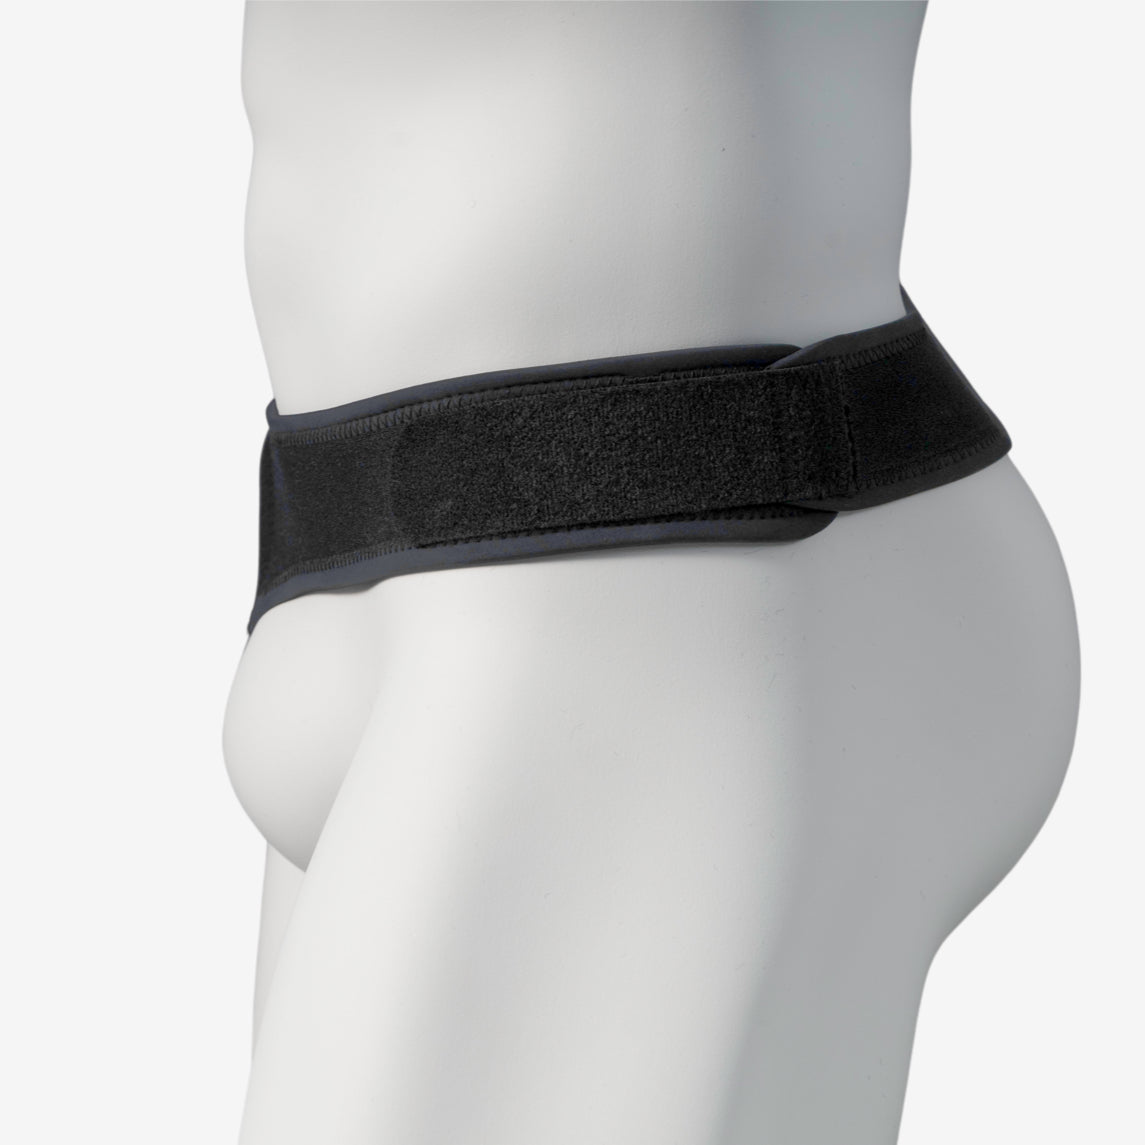 Cheap Beneficial to Pain Hernia Belt With 1 Compression Pad Inguinal  Support Strap Fixation Strap Adult